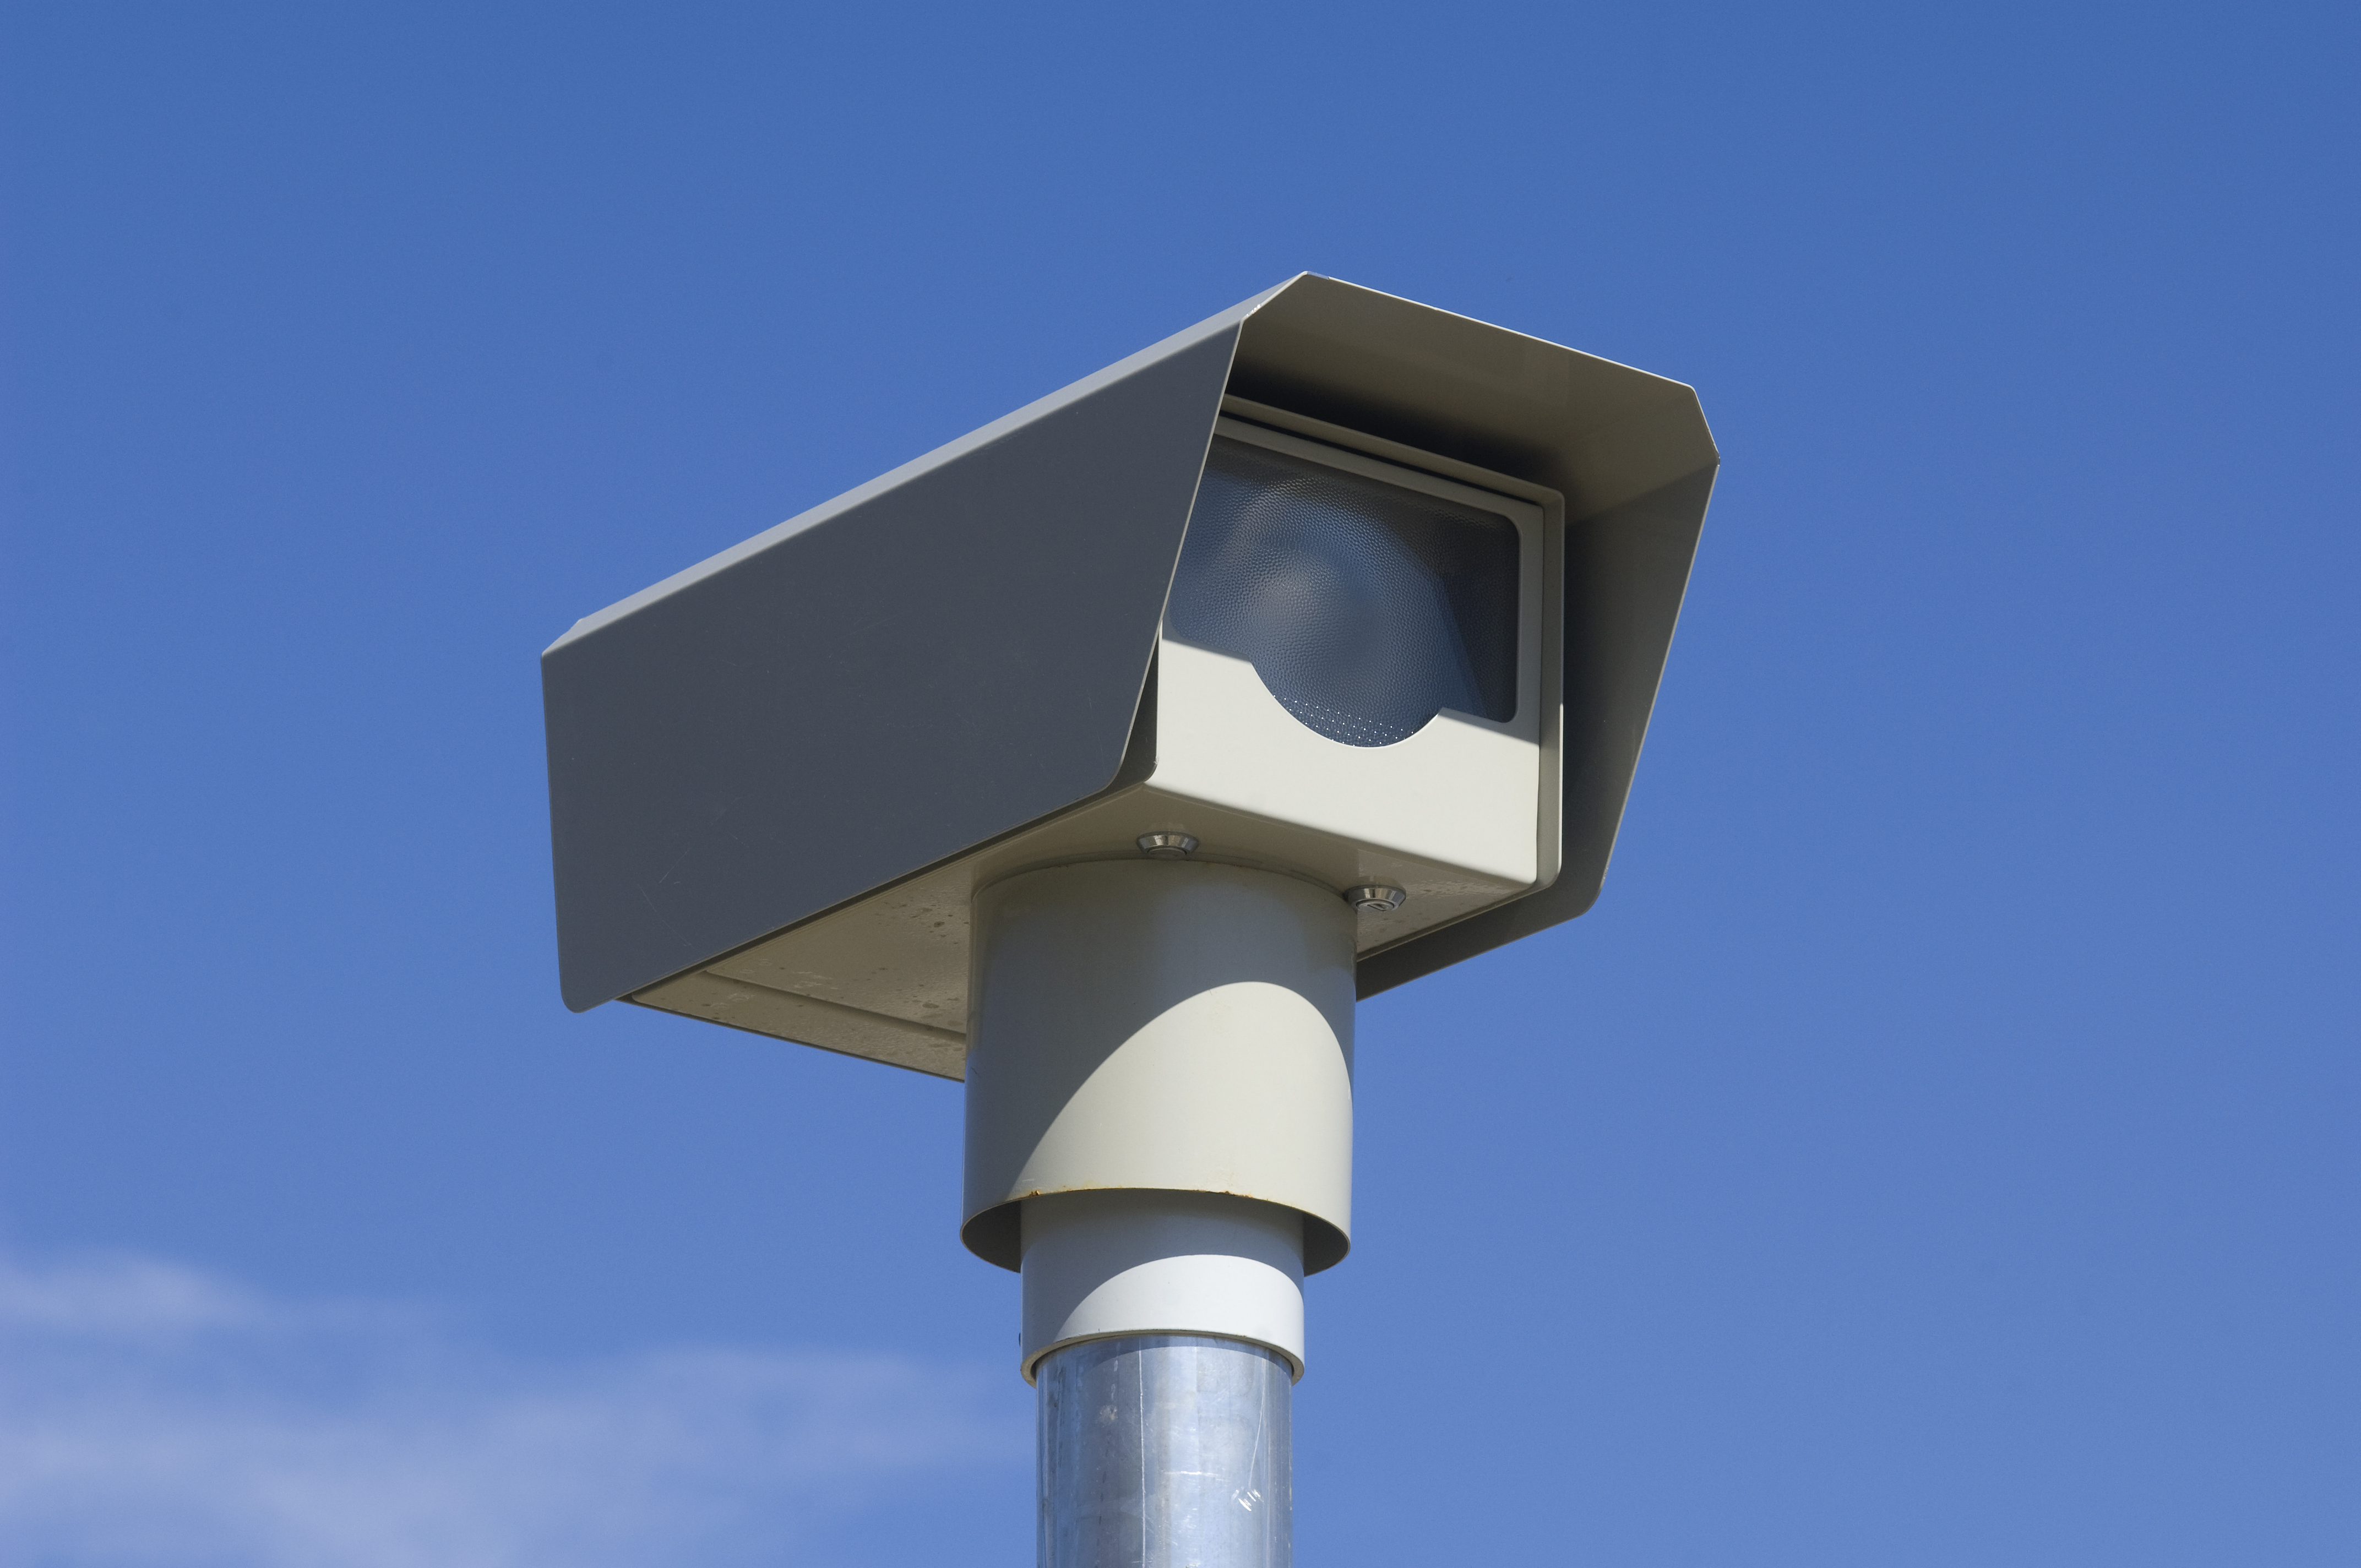 New bill could bring speed cameras to Broad Street